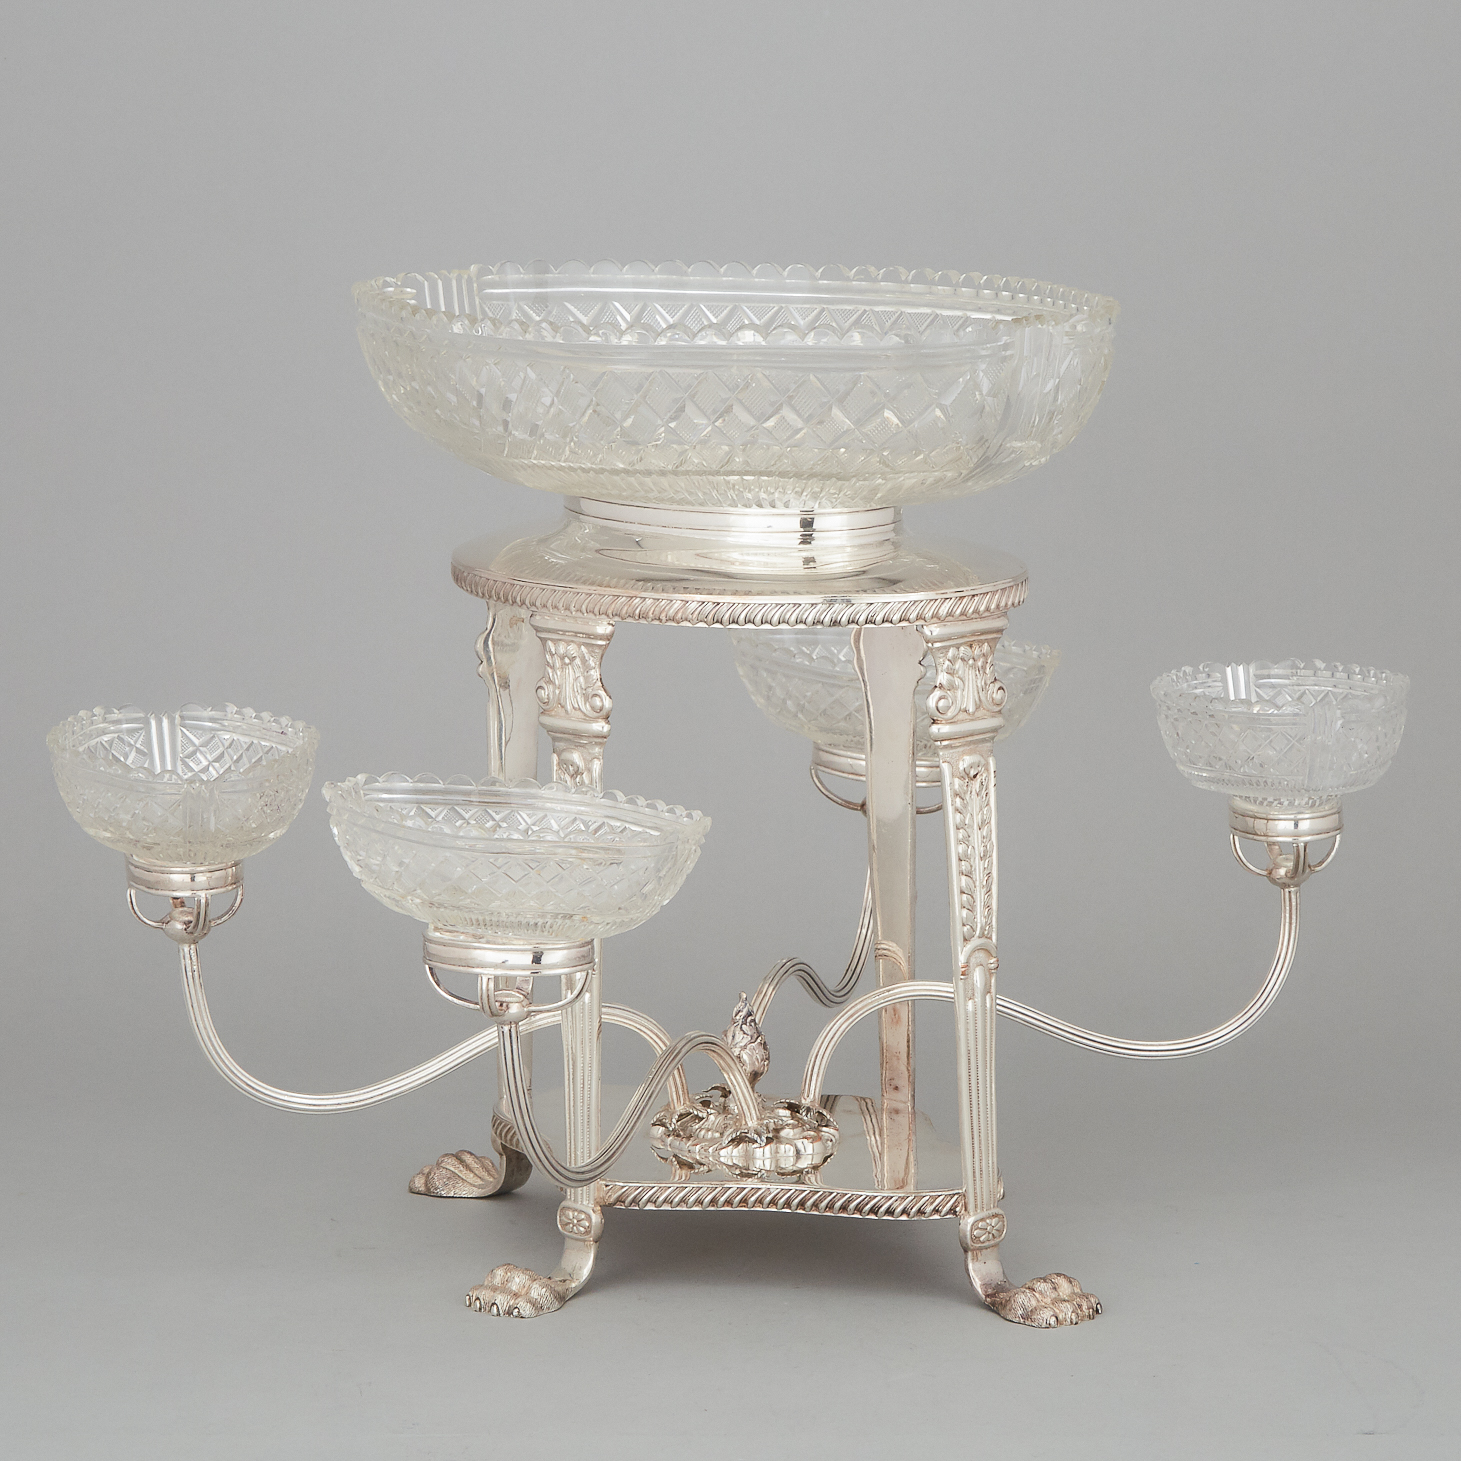 English Silver Plated and Cut Glass Centrepiece, 20th century